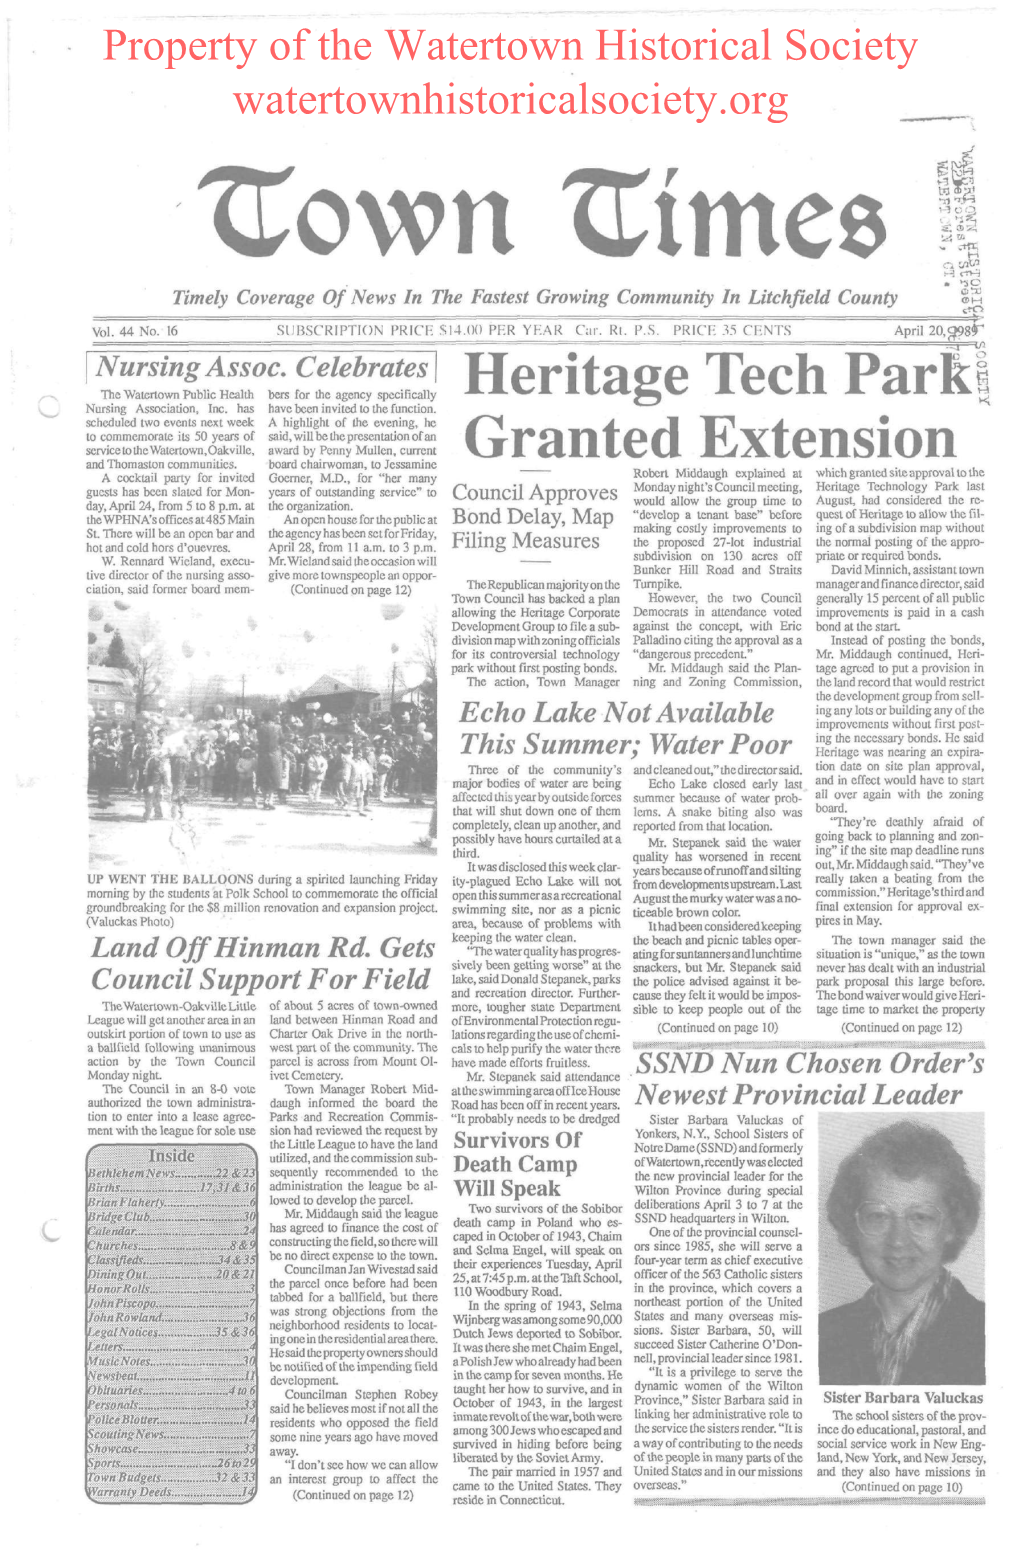 Heritage Tech Park Granted Extension